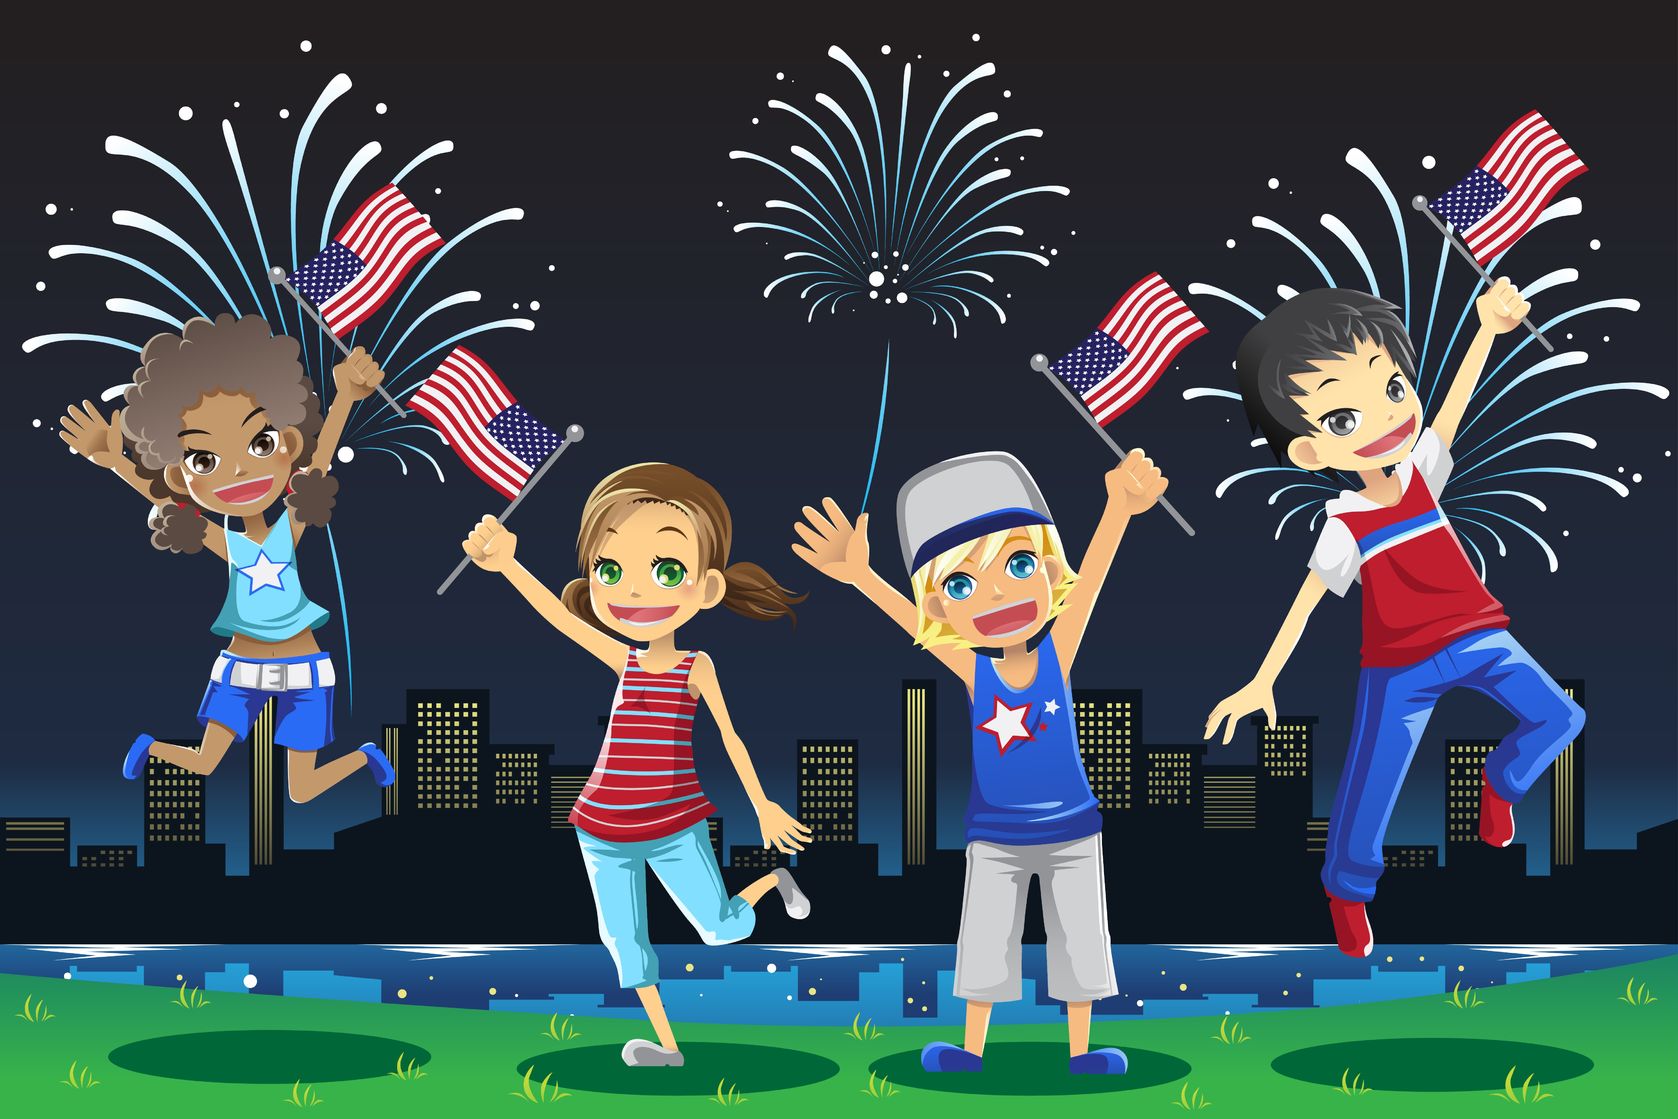 Five Fireworks Safety Tips You Need to Know to Avoid the ER this Fourth of July